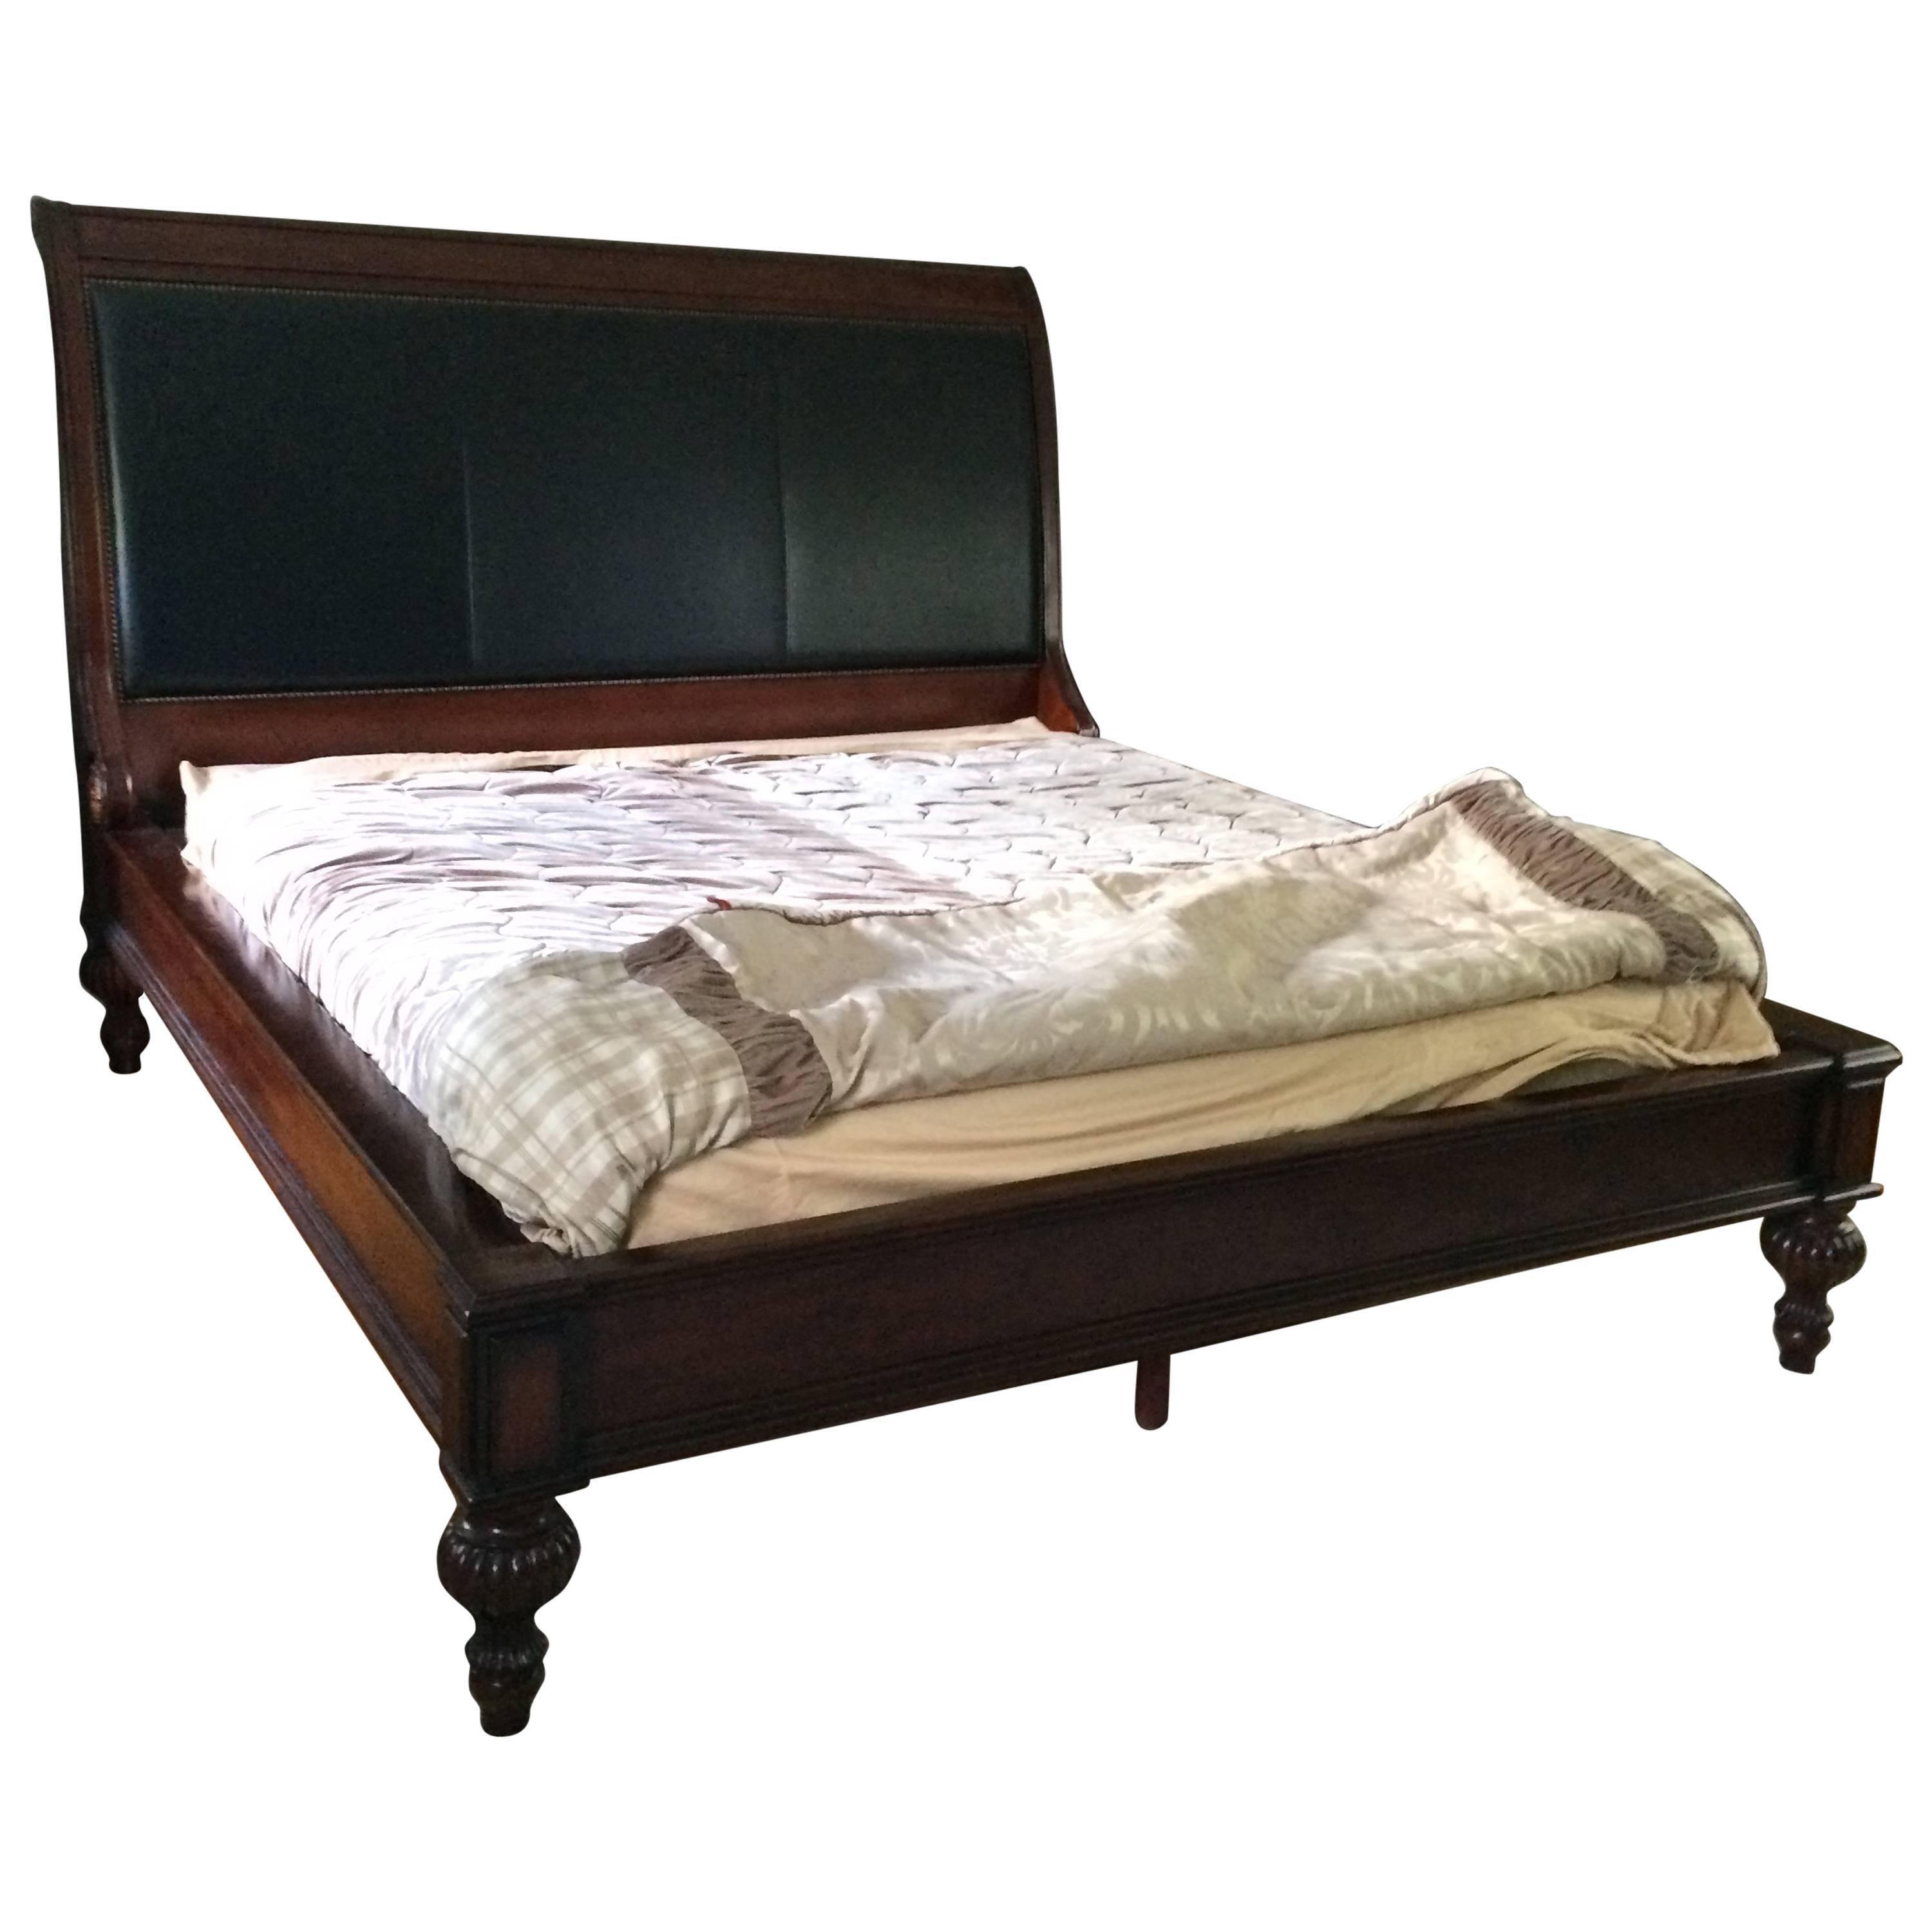 Regal California King Mahogany and Black Leather Sleigh Bed